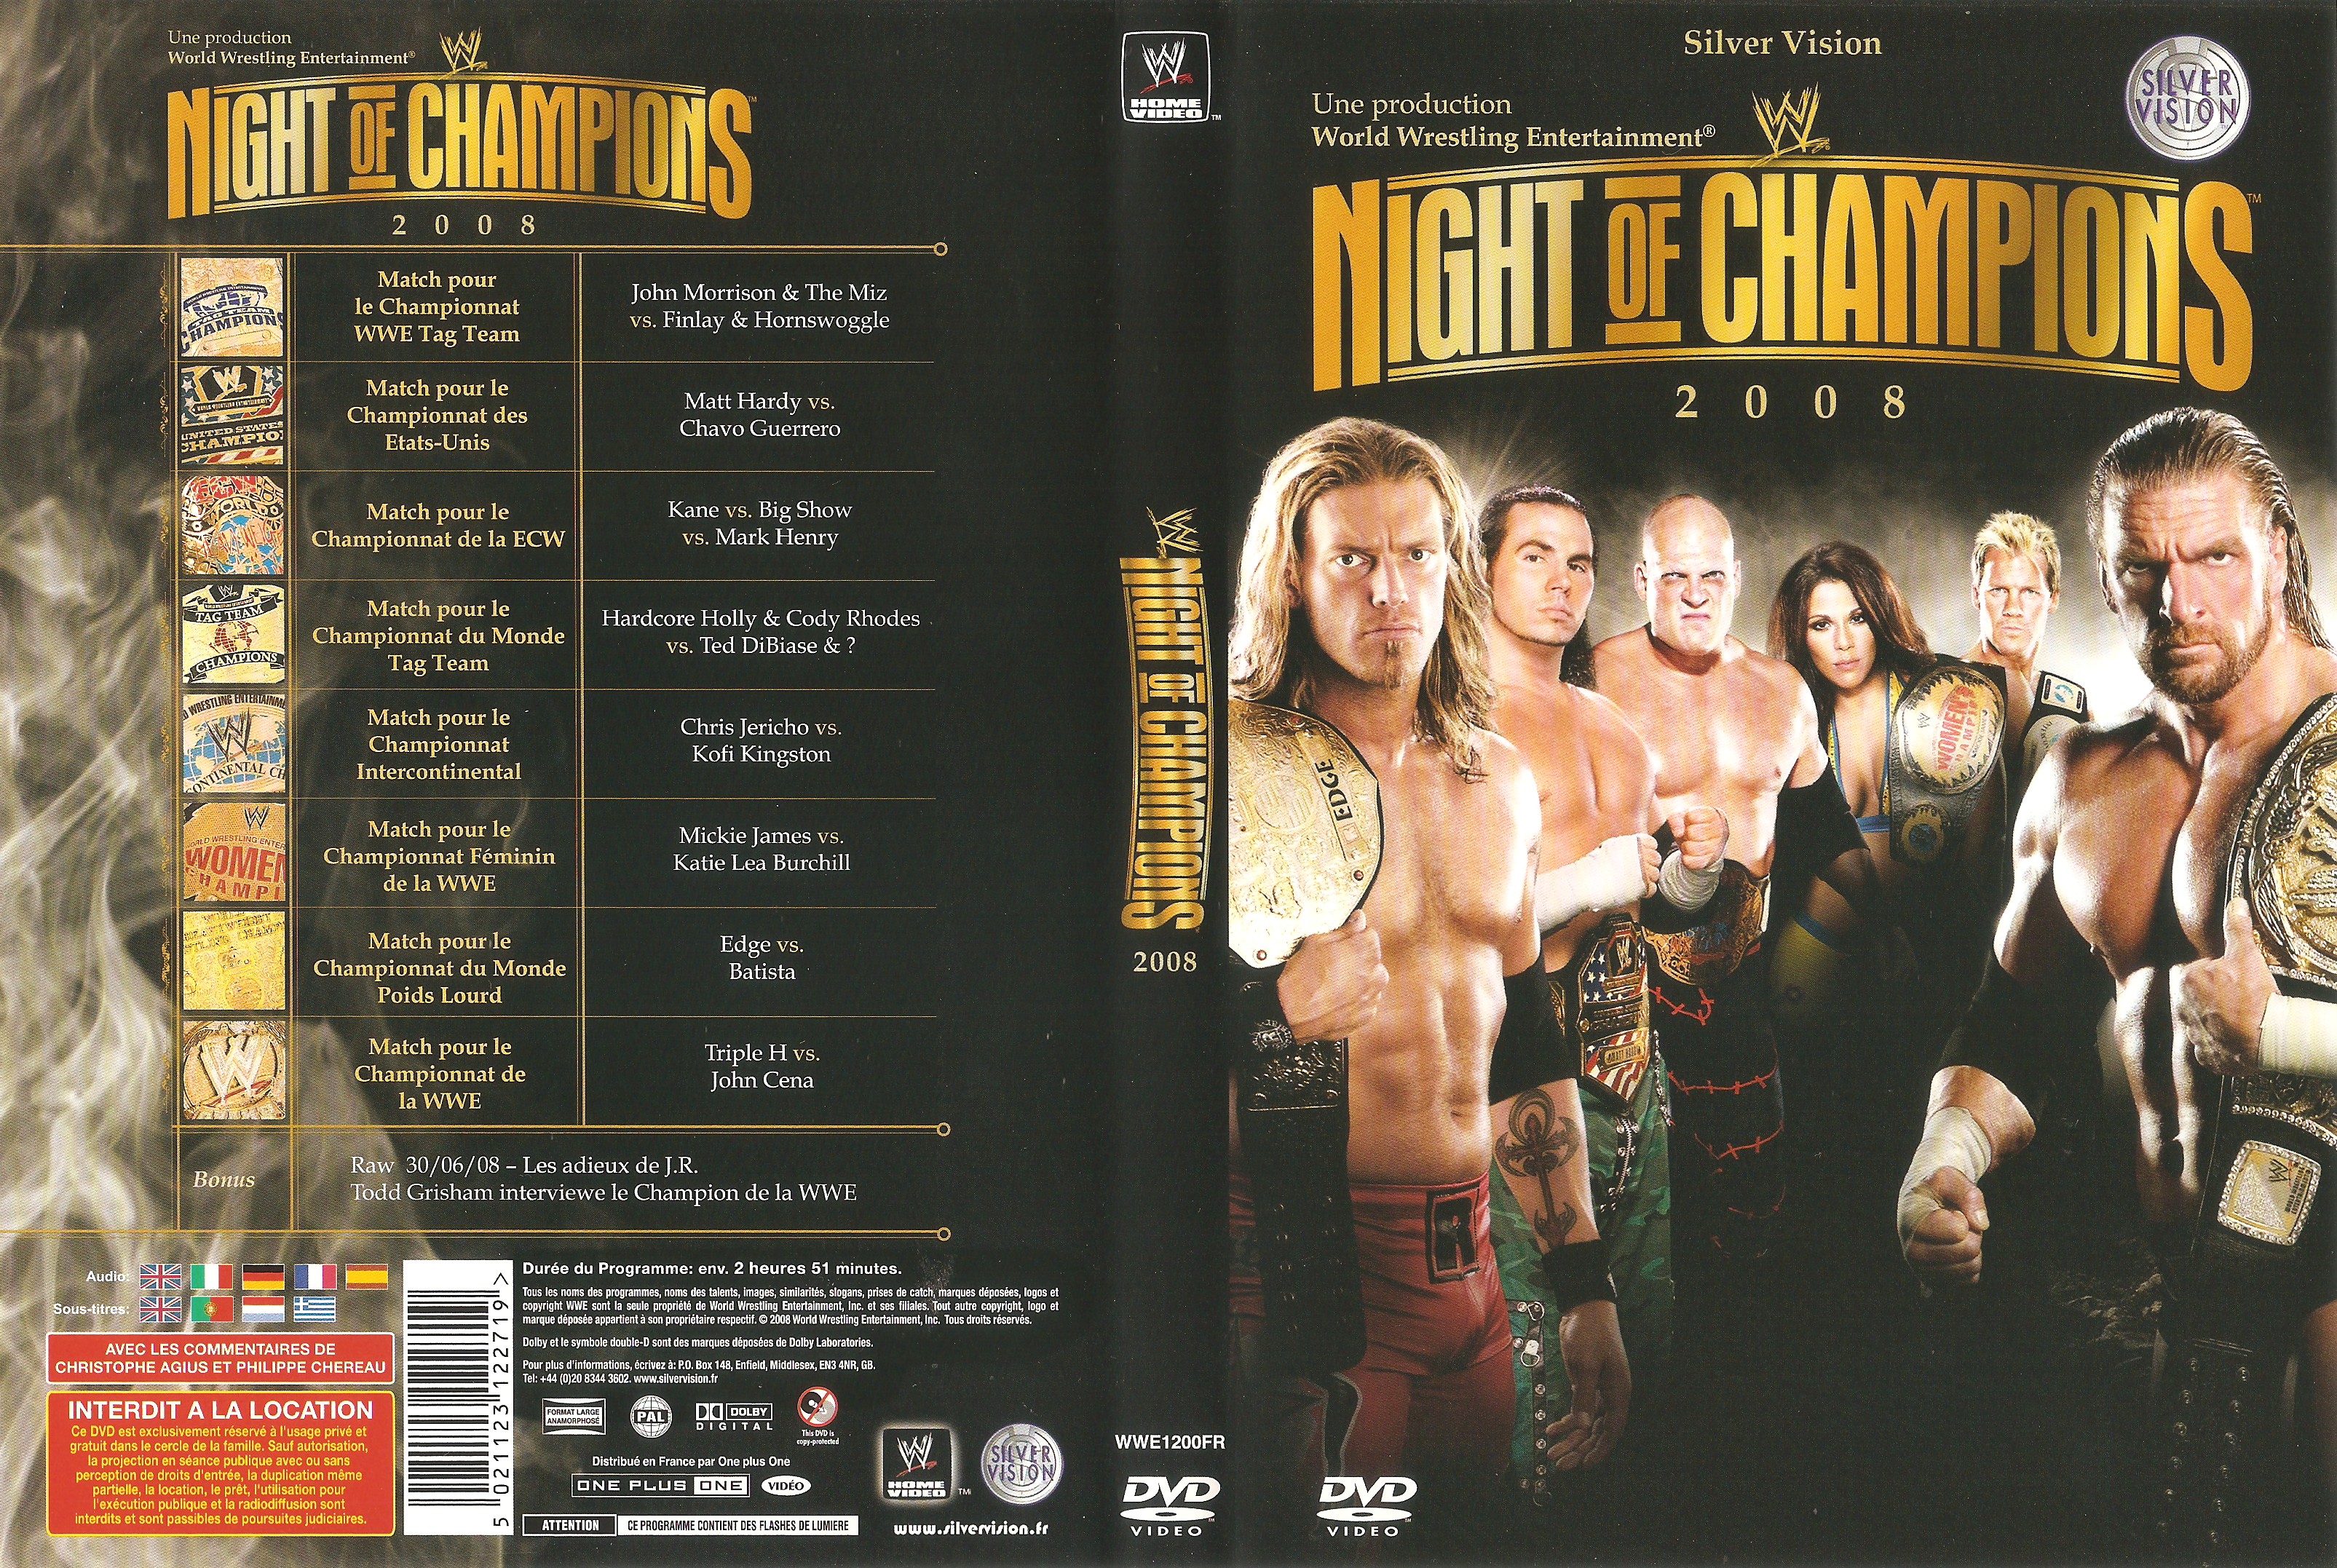 Jaquette DVD WWE Night of Champions 2008